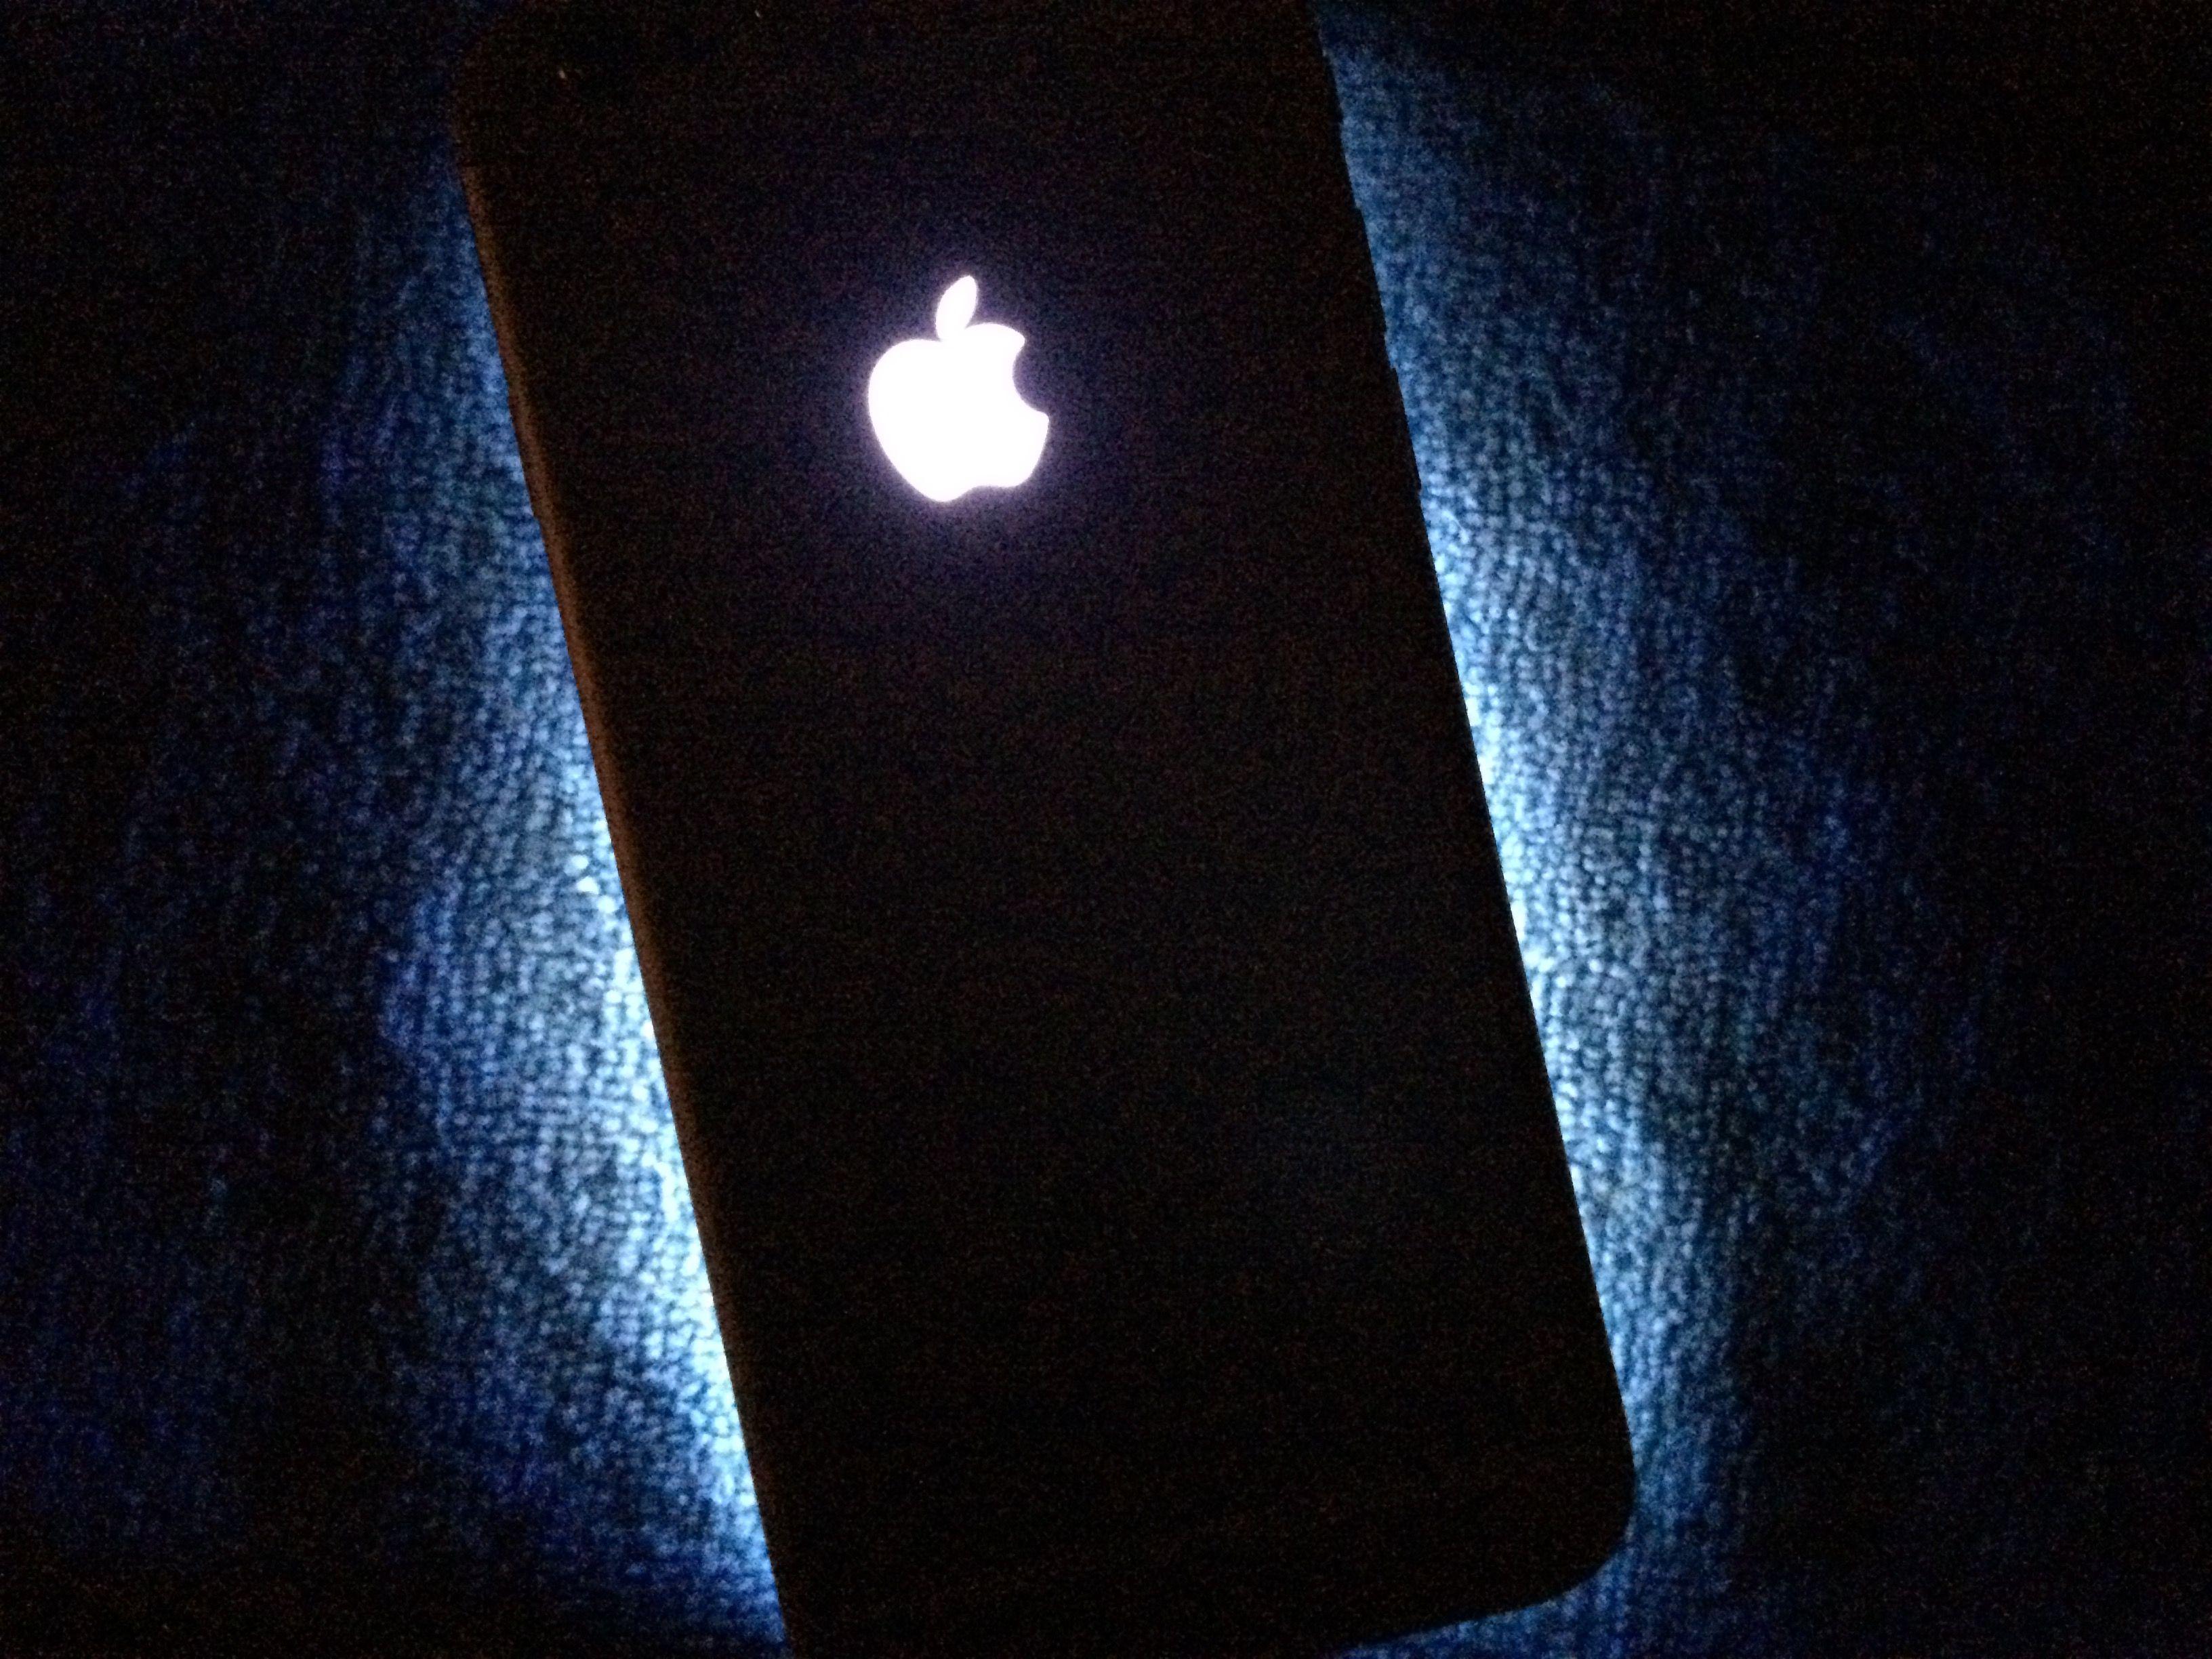 Glowing Apple Logo - How to install a glowing Apple logo on iPhone 6s